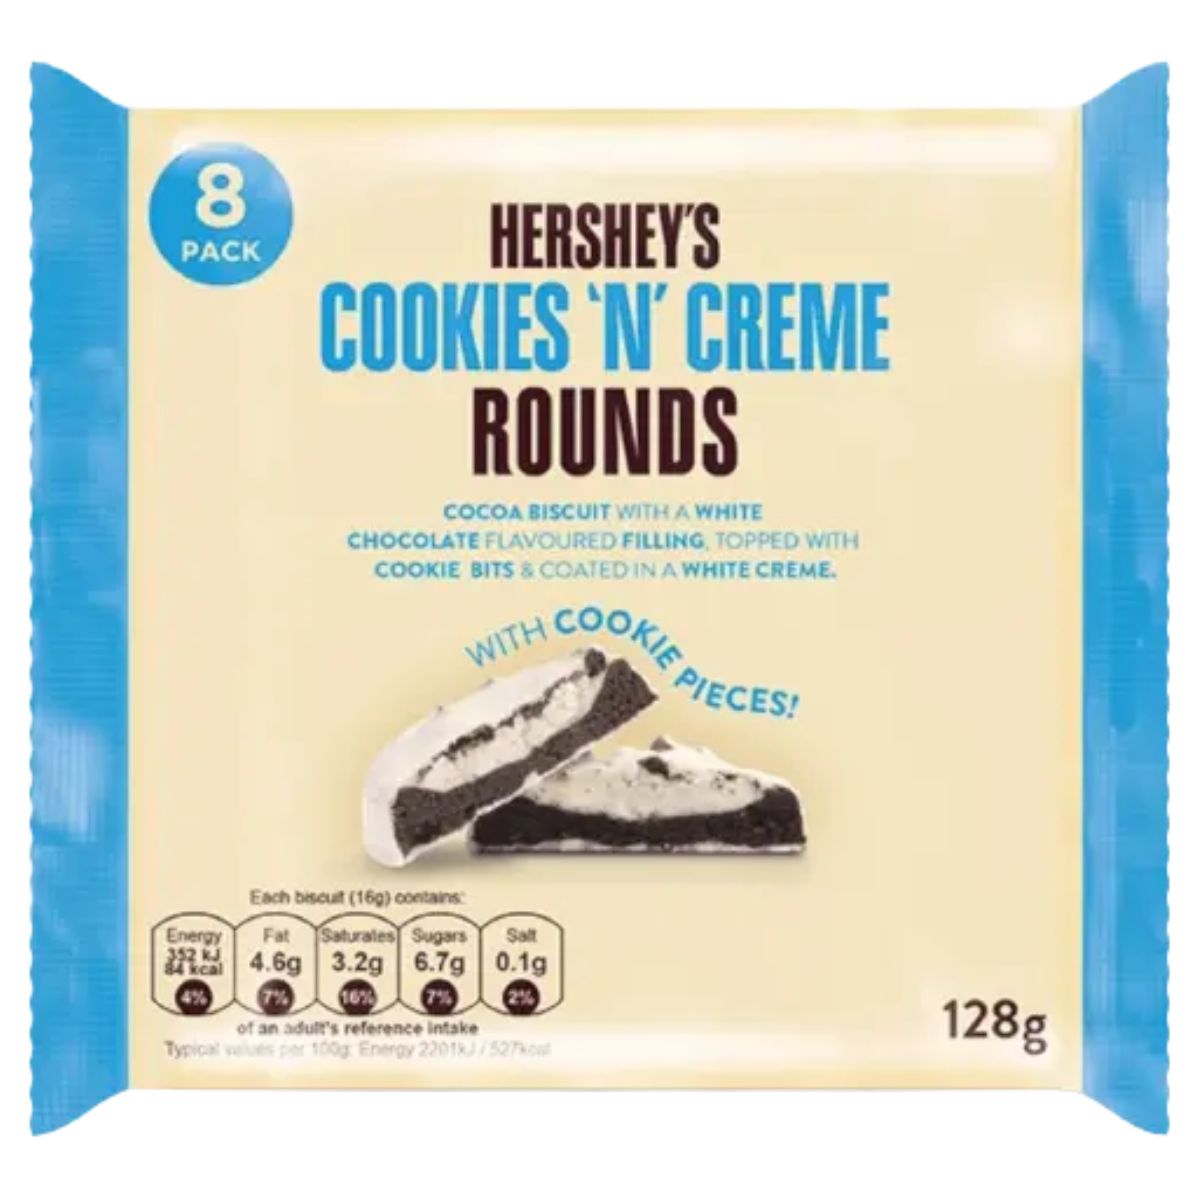 Hersheys Cookies N Creme Rounds - 8 Pack (128g) are delicious.